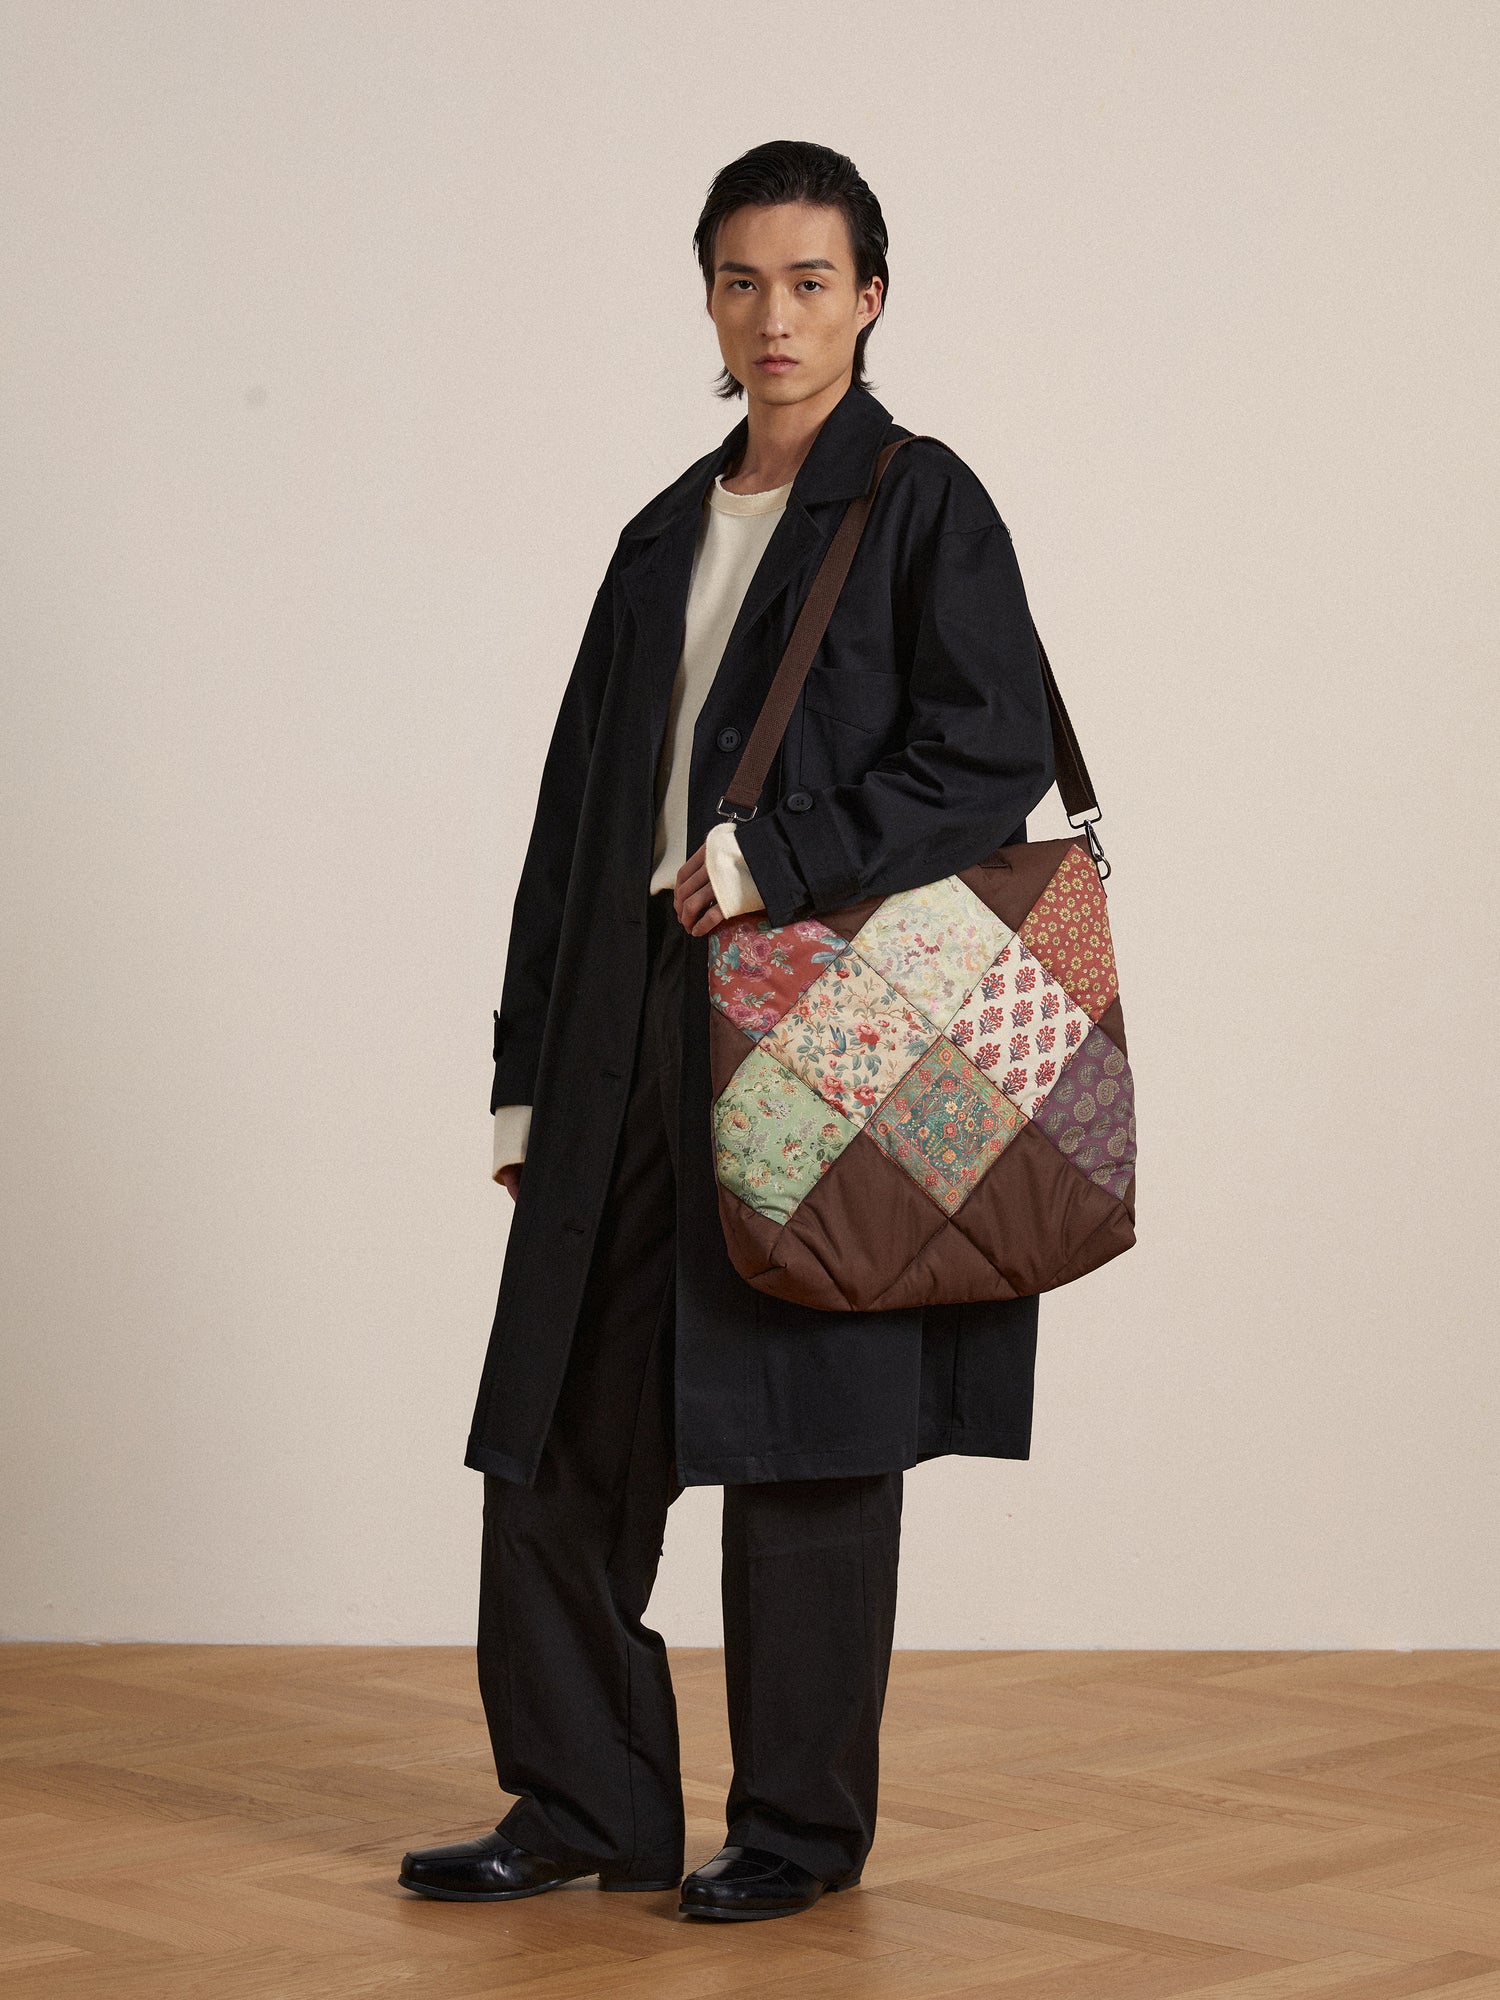 A man is holding a Profound Parisa Quilted Tapestry Bag with a patchwork pattern.